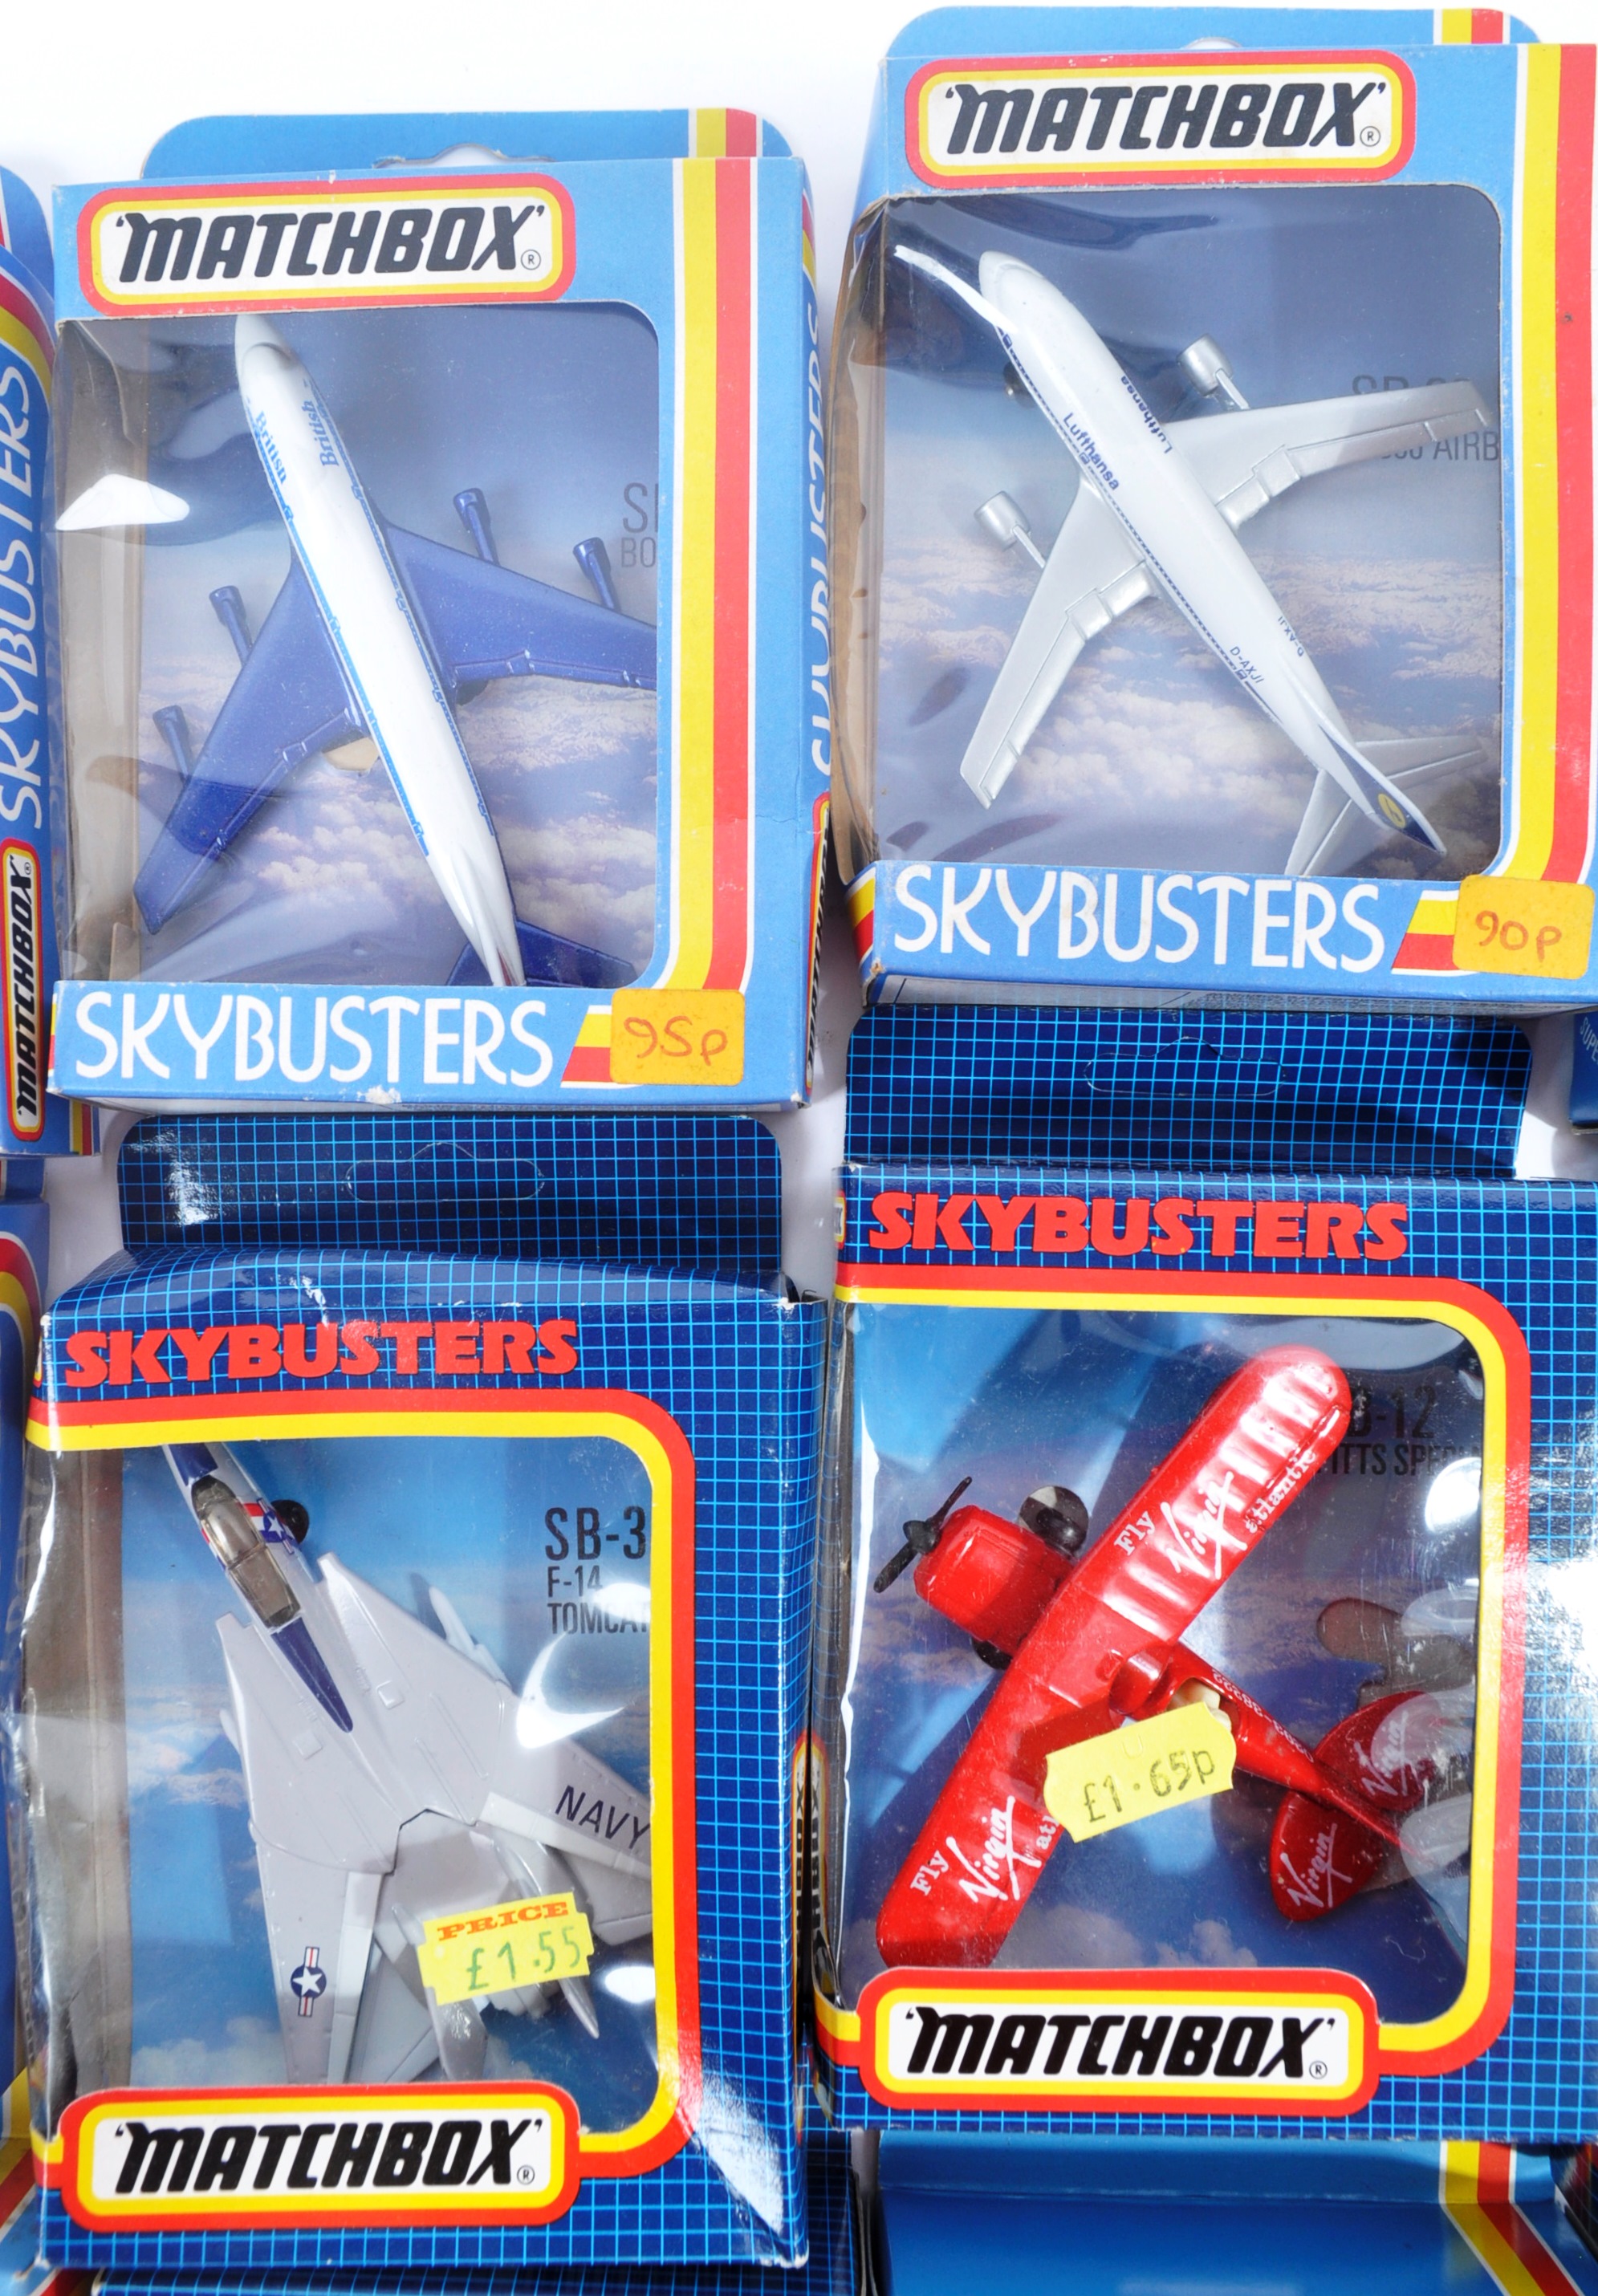 COLLECTION OF X15 MATCHBOX SKYBUSTERS DIECAST MODEL AEROPLANES - Image 5 of 7